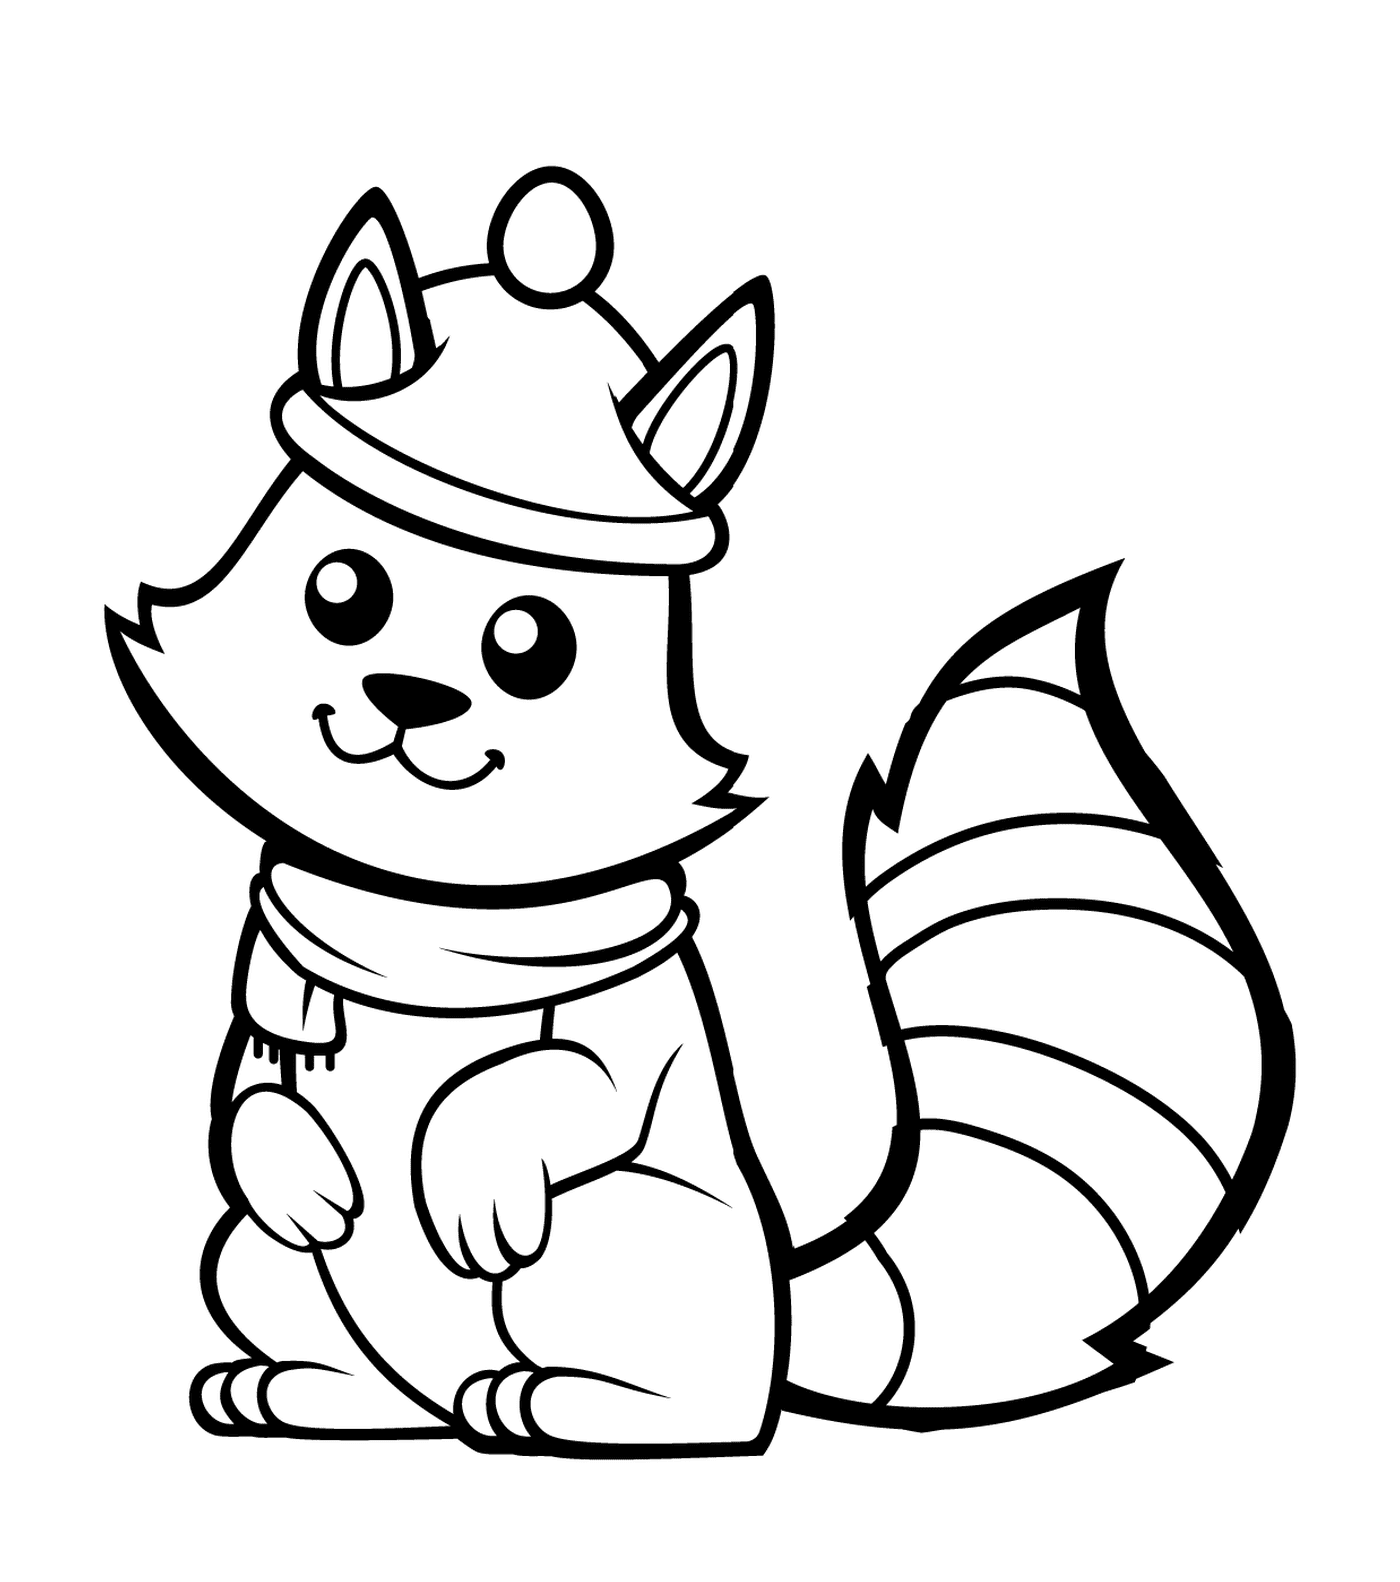  A squirrel with a nice hat and a scarf 